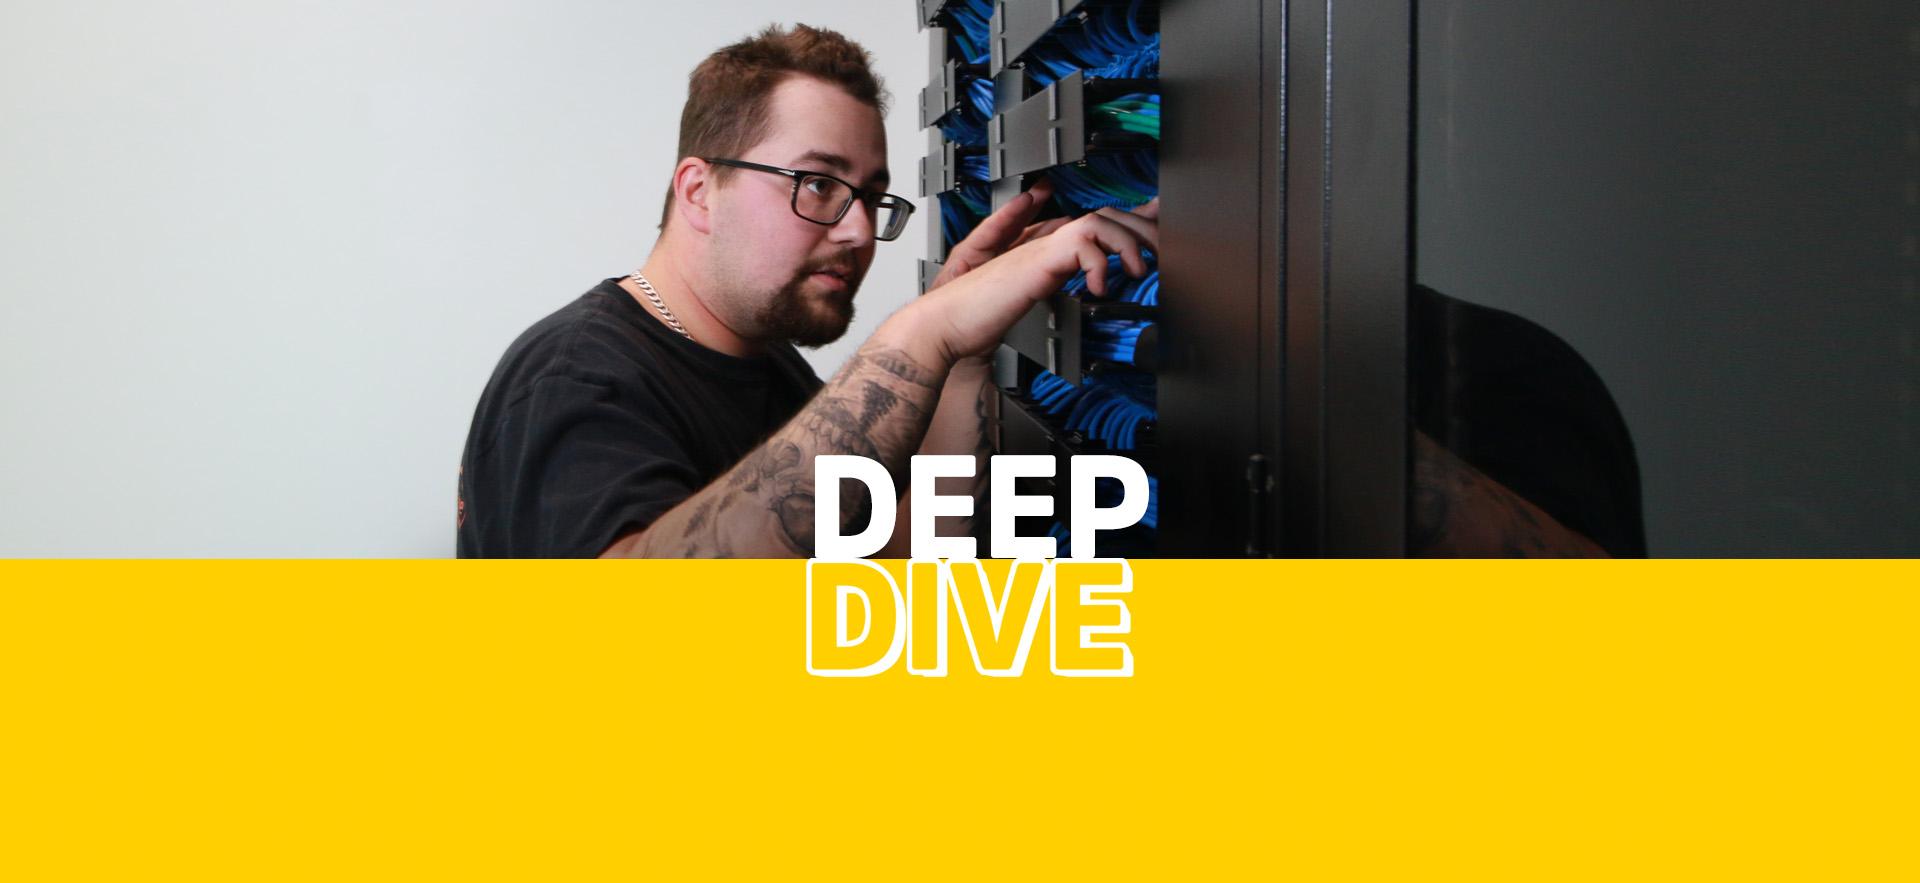 Deep Dive IT student working on server